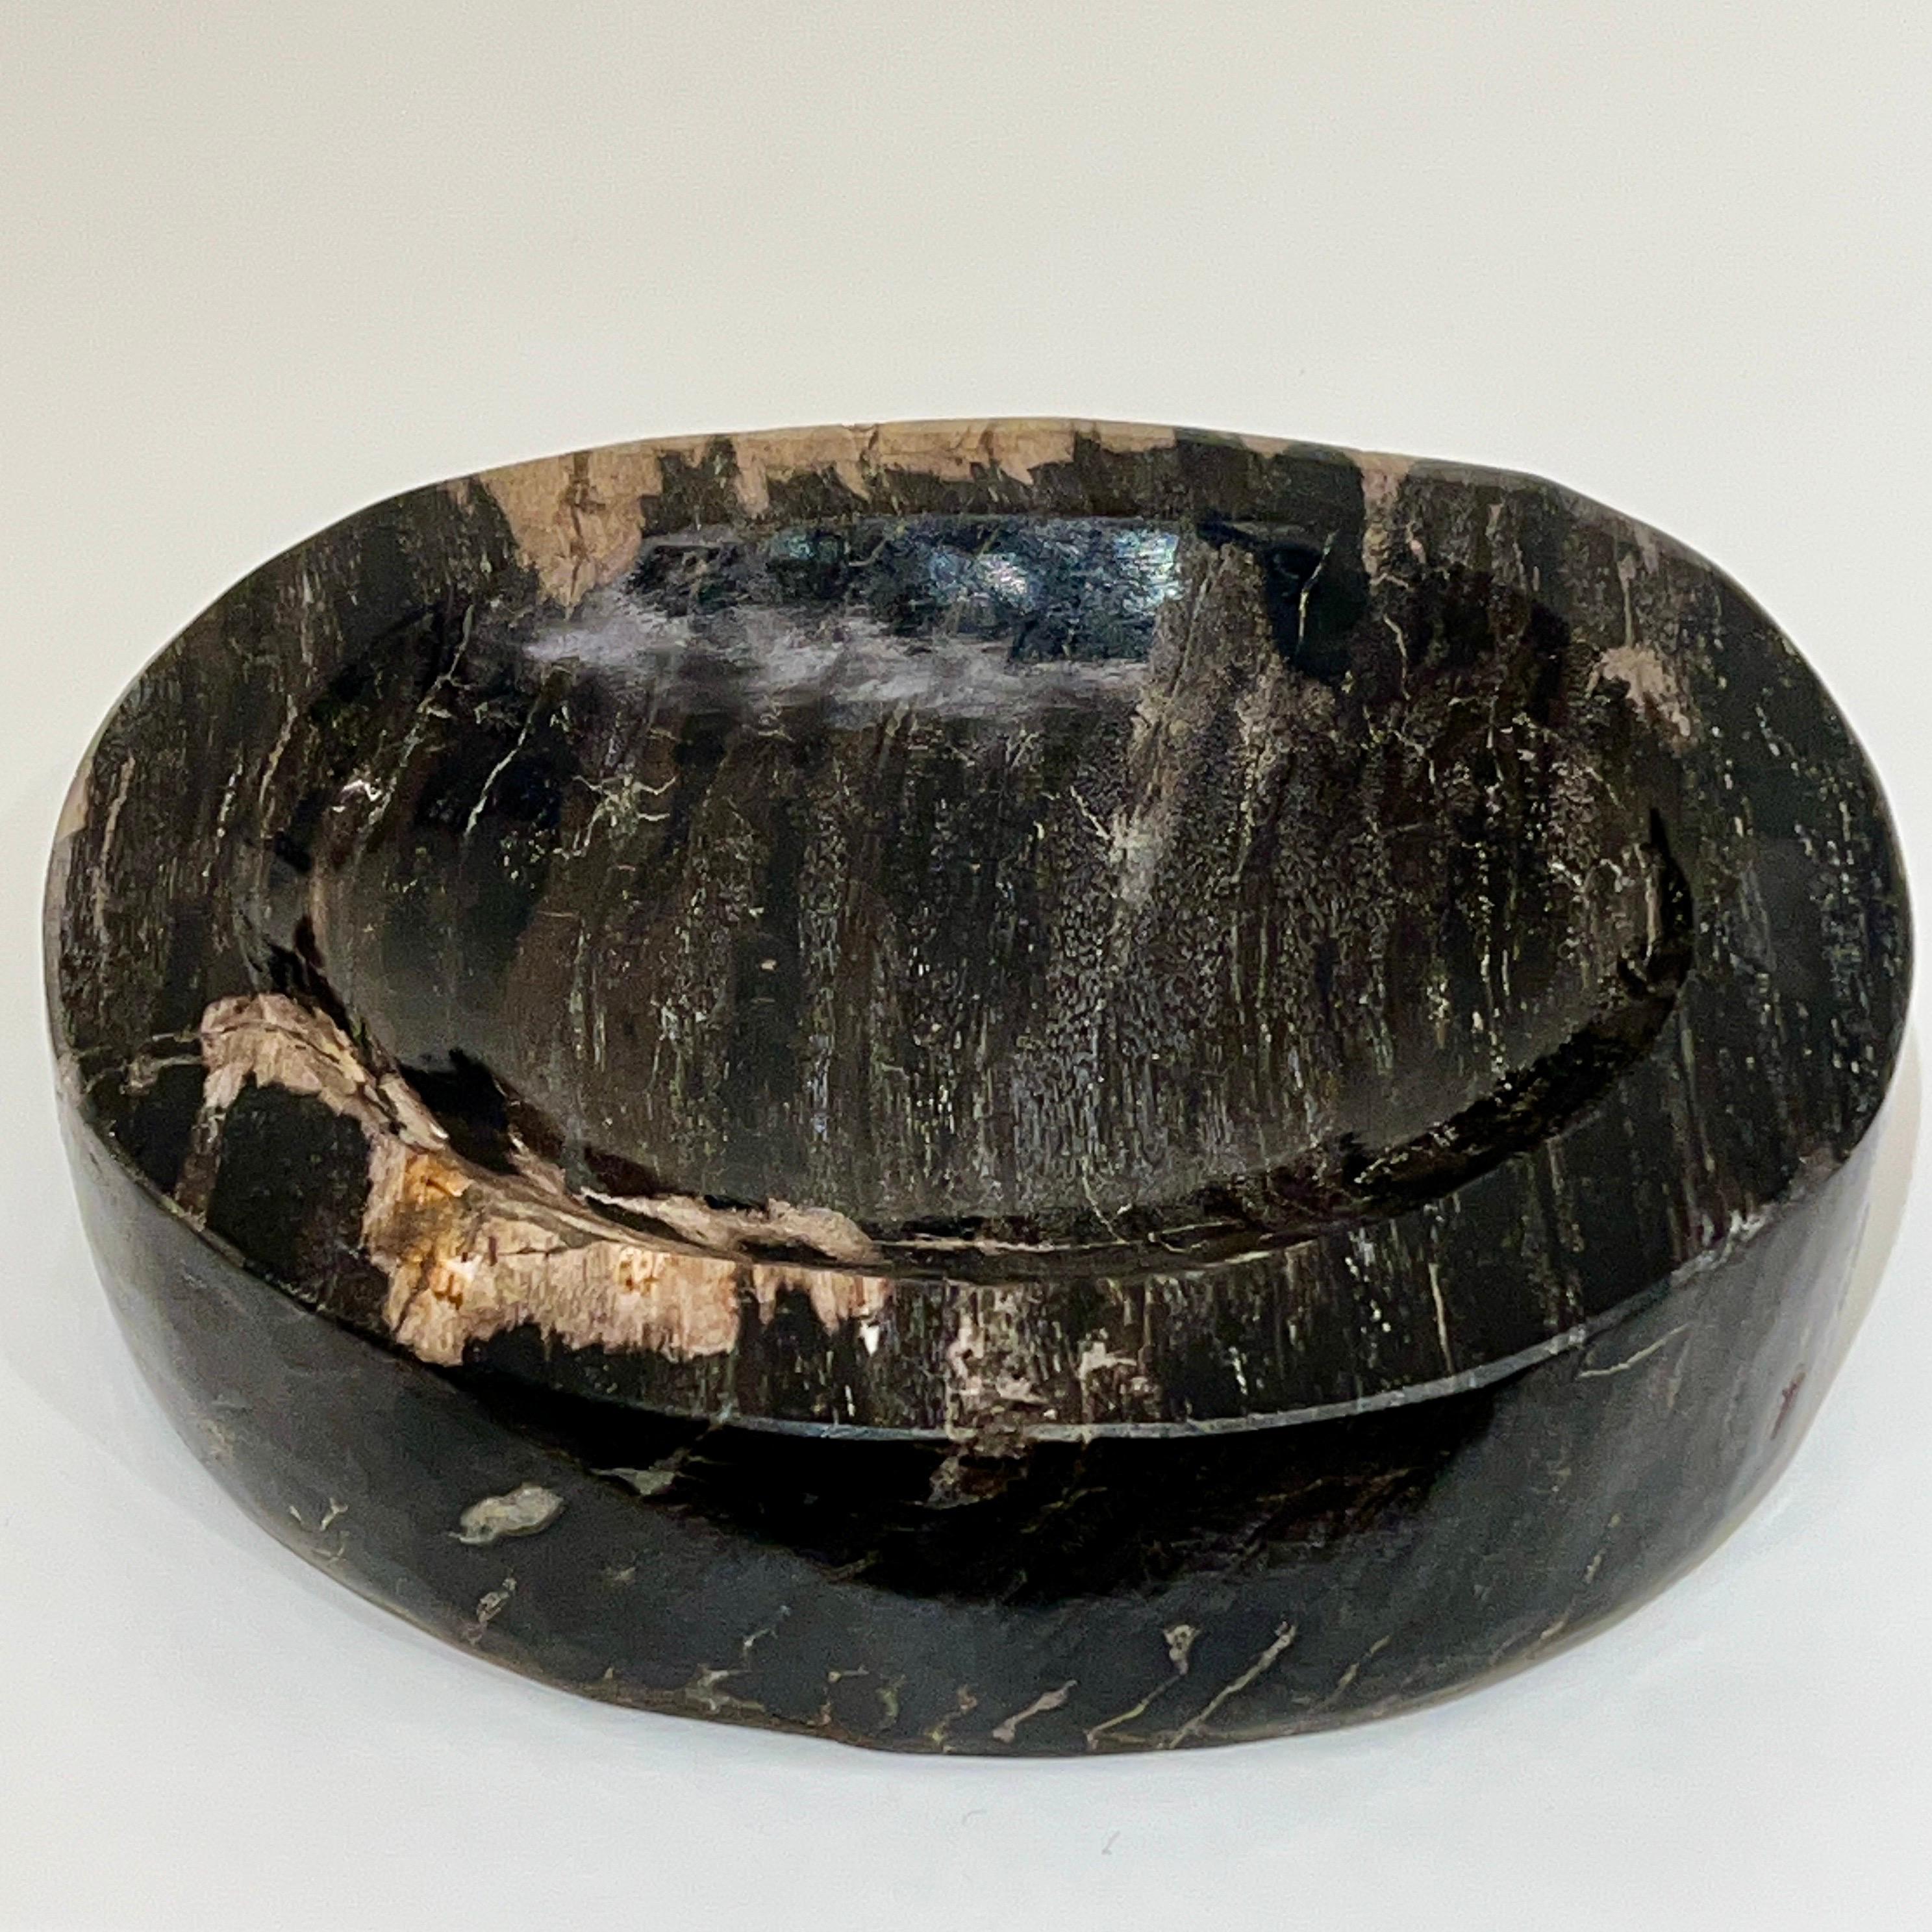 Petrified wood bowl naturally fossilized throughout thousands of years. These rare pieces have been hand cut and feature the highest quality petrified wood with polished centers and edges. Features unique coloration with natural stripes and spots in